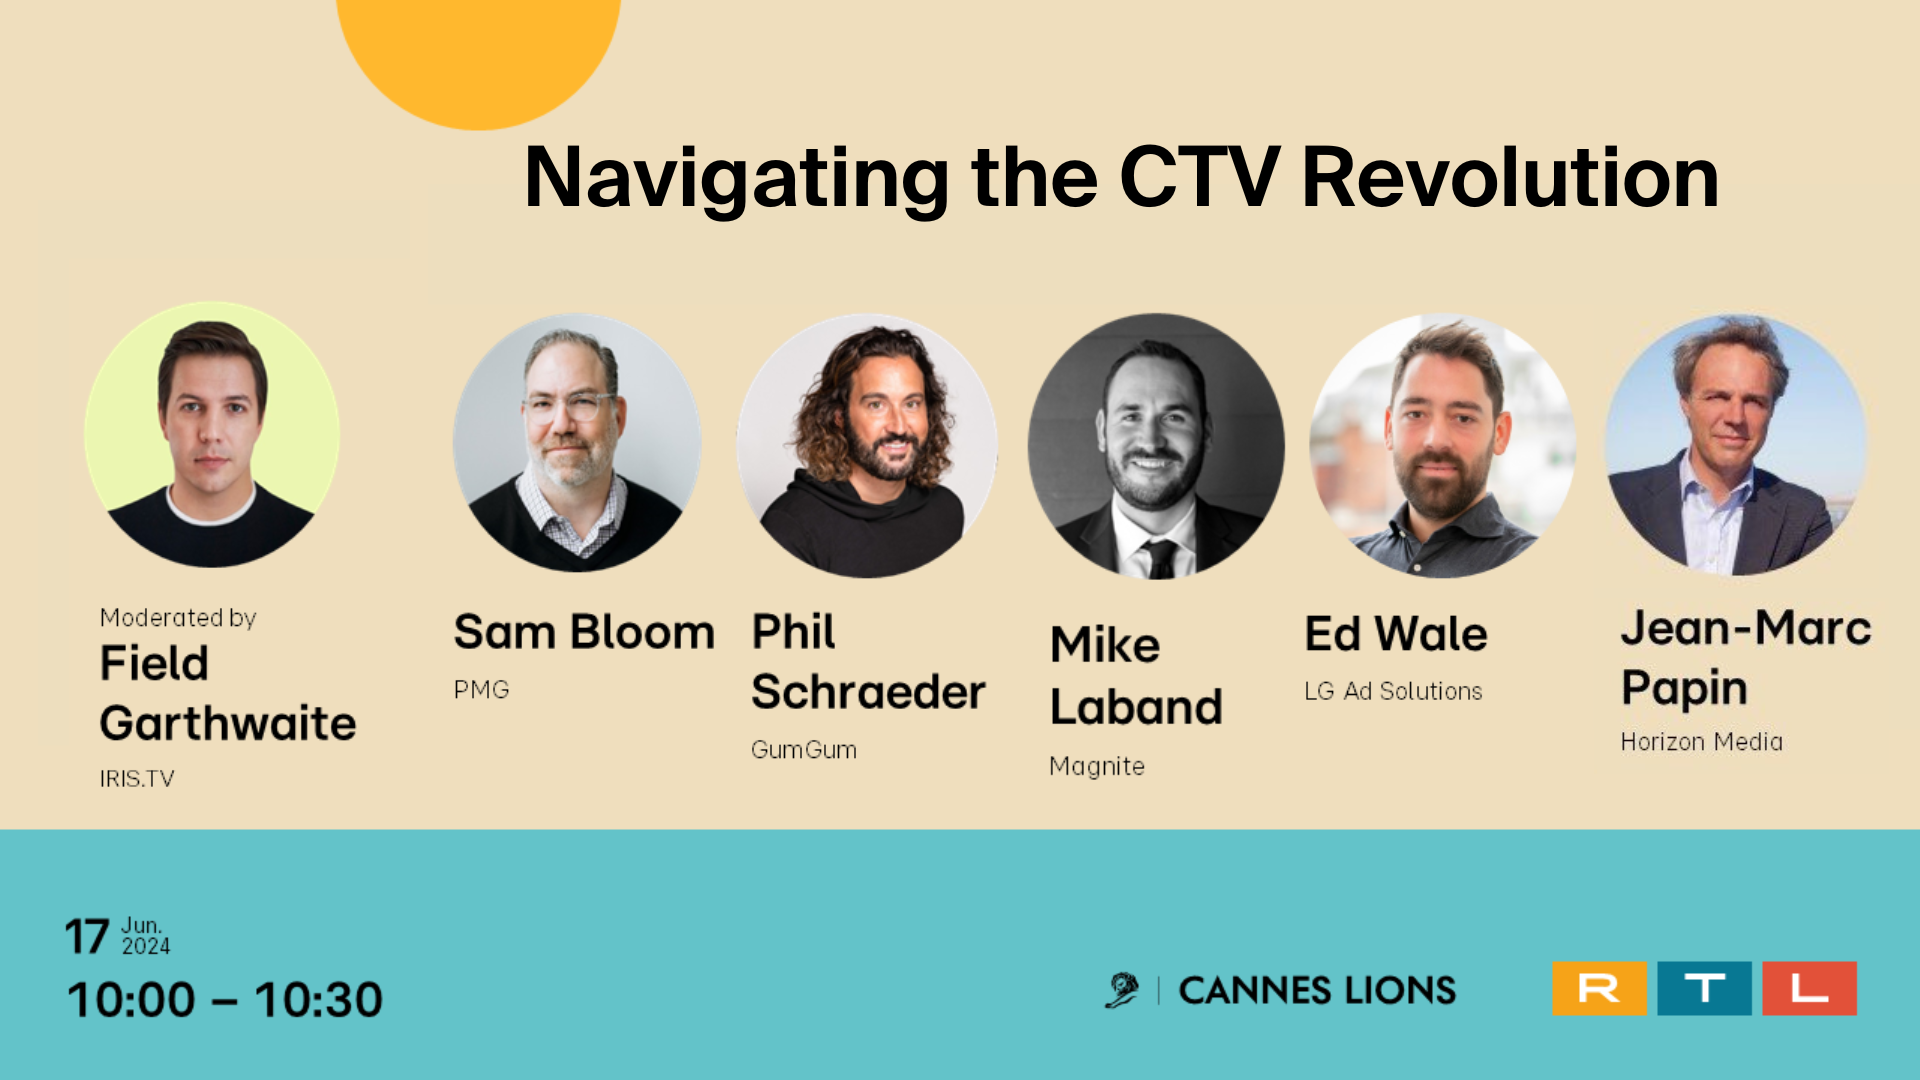 Cannes Lions: Navigating the CTV Revolution with Video-level Contextual Targeting